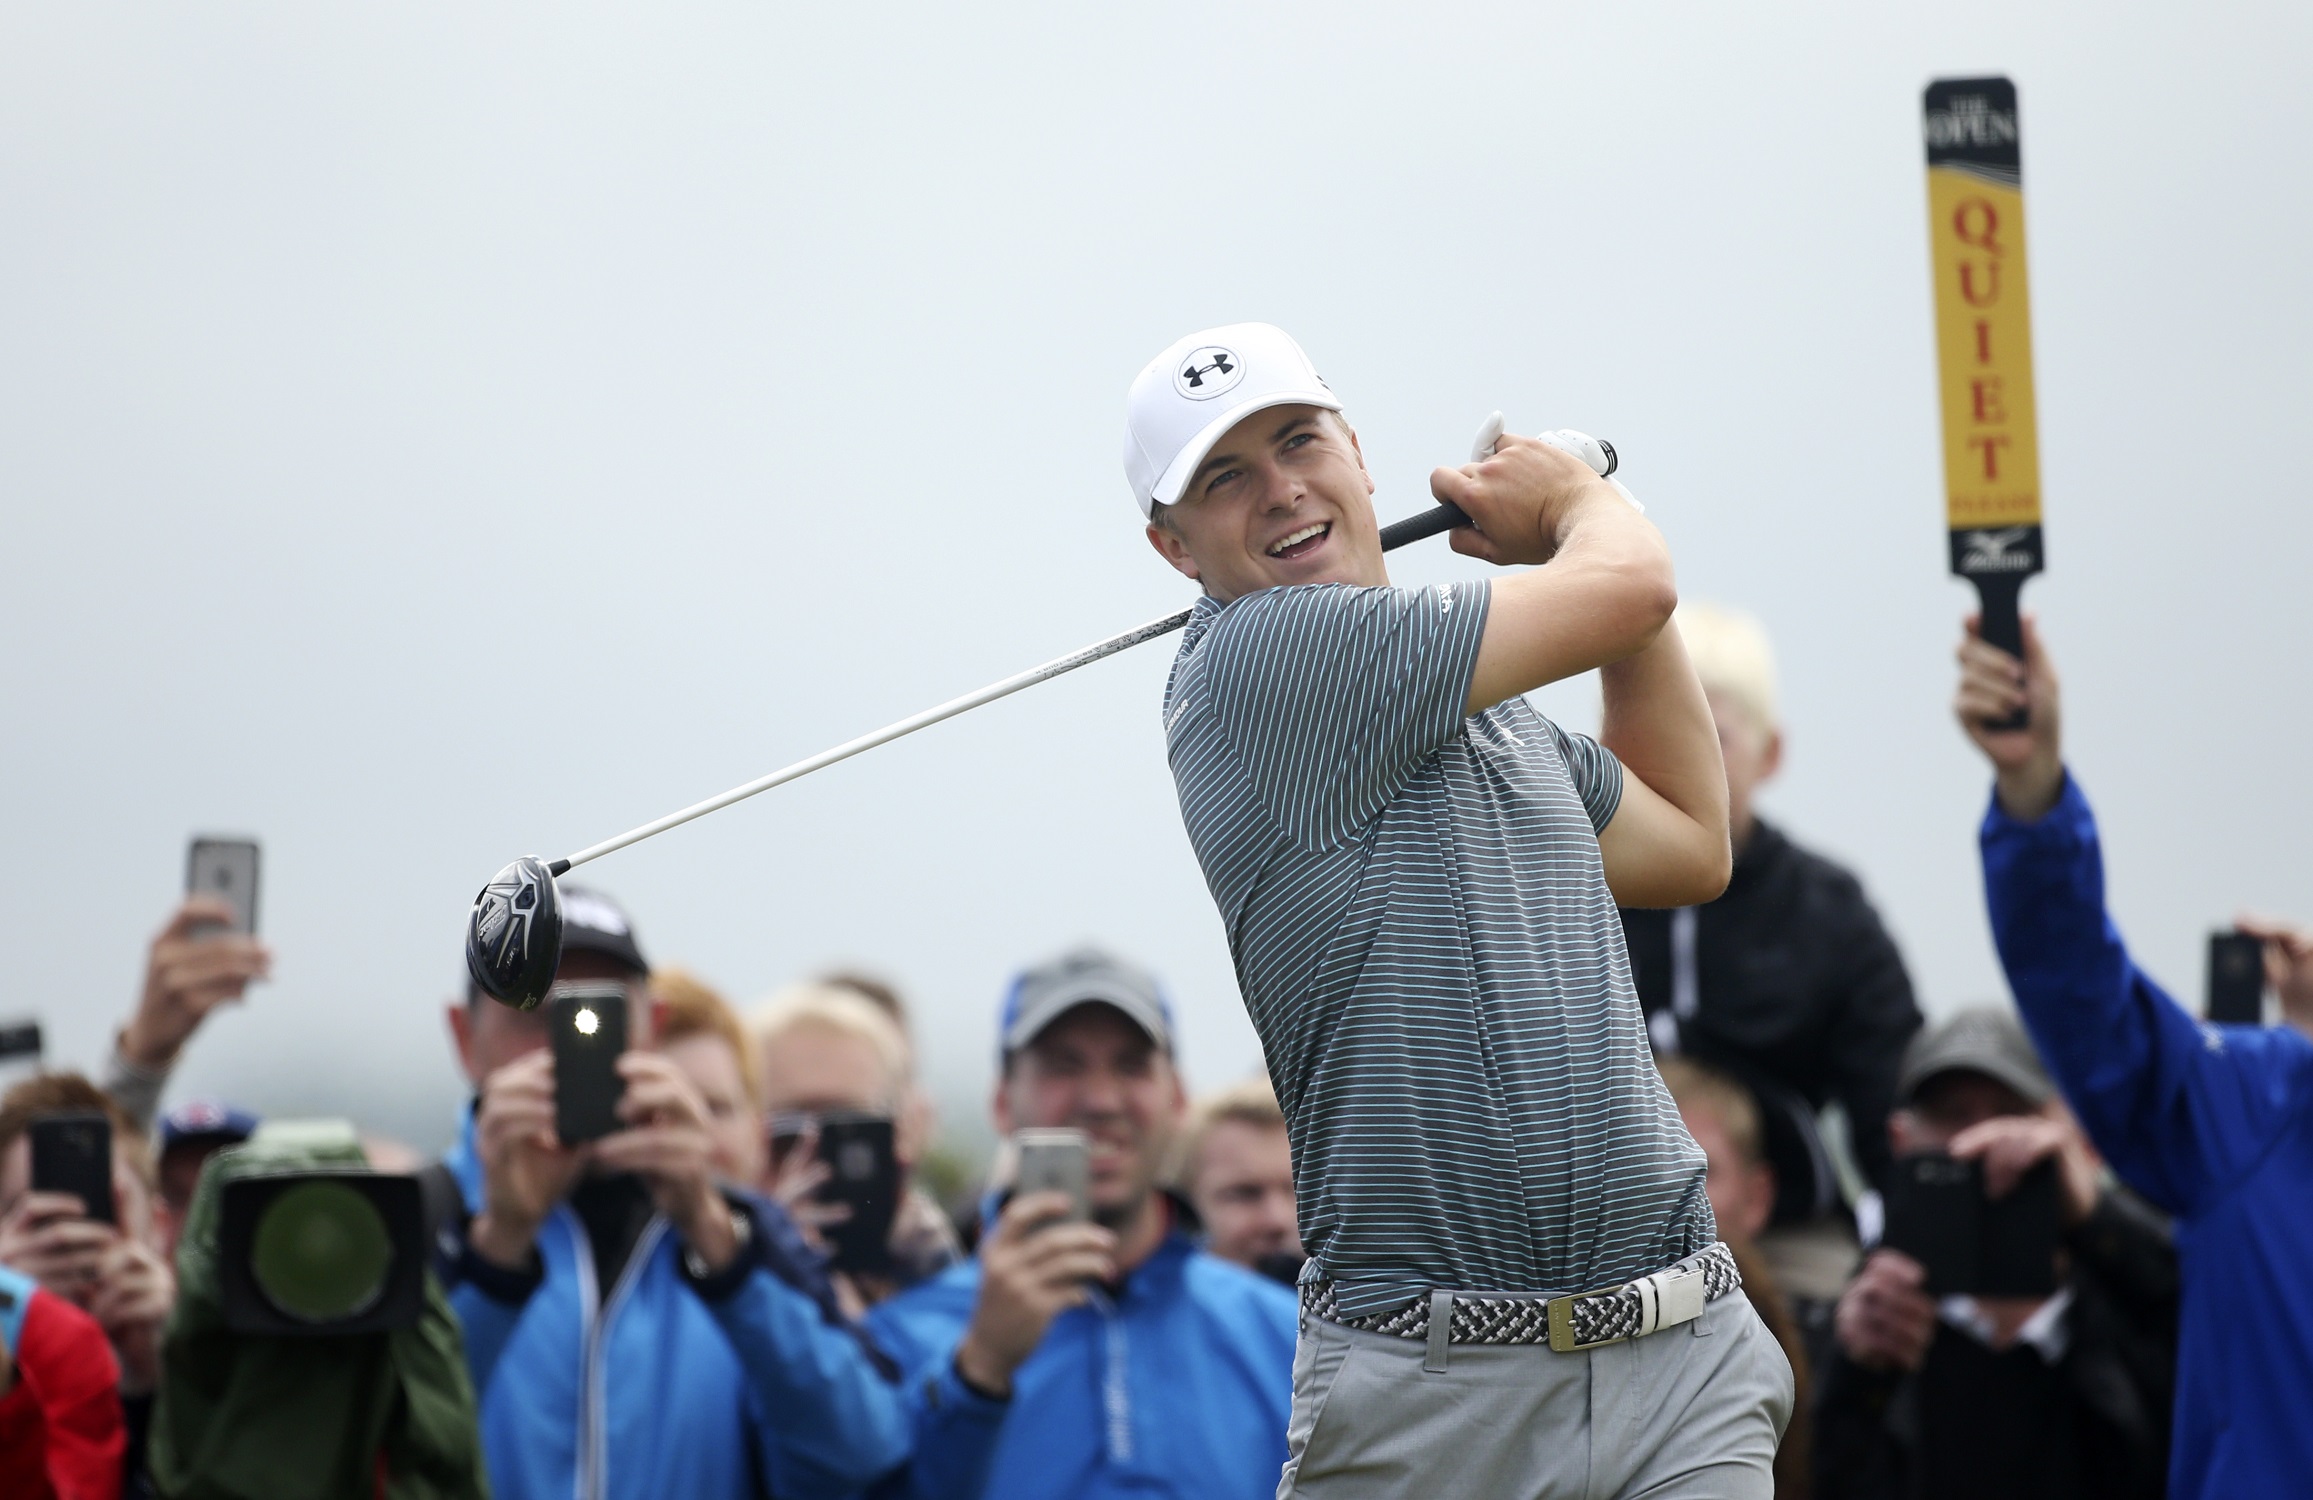 Jordan Spieth, the ‘Hogan Slam’ and favorites for The Open Championship